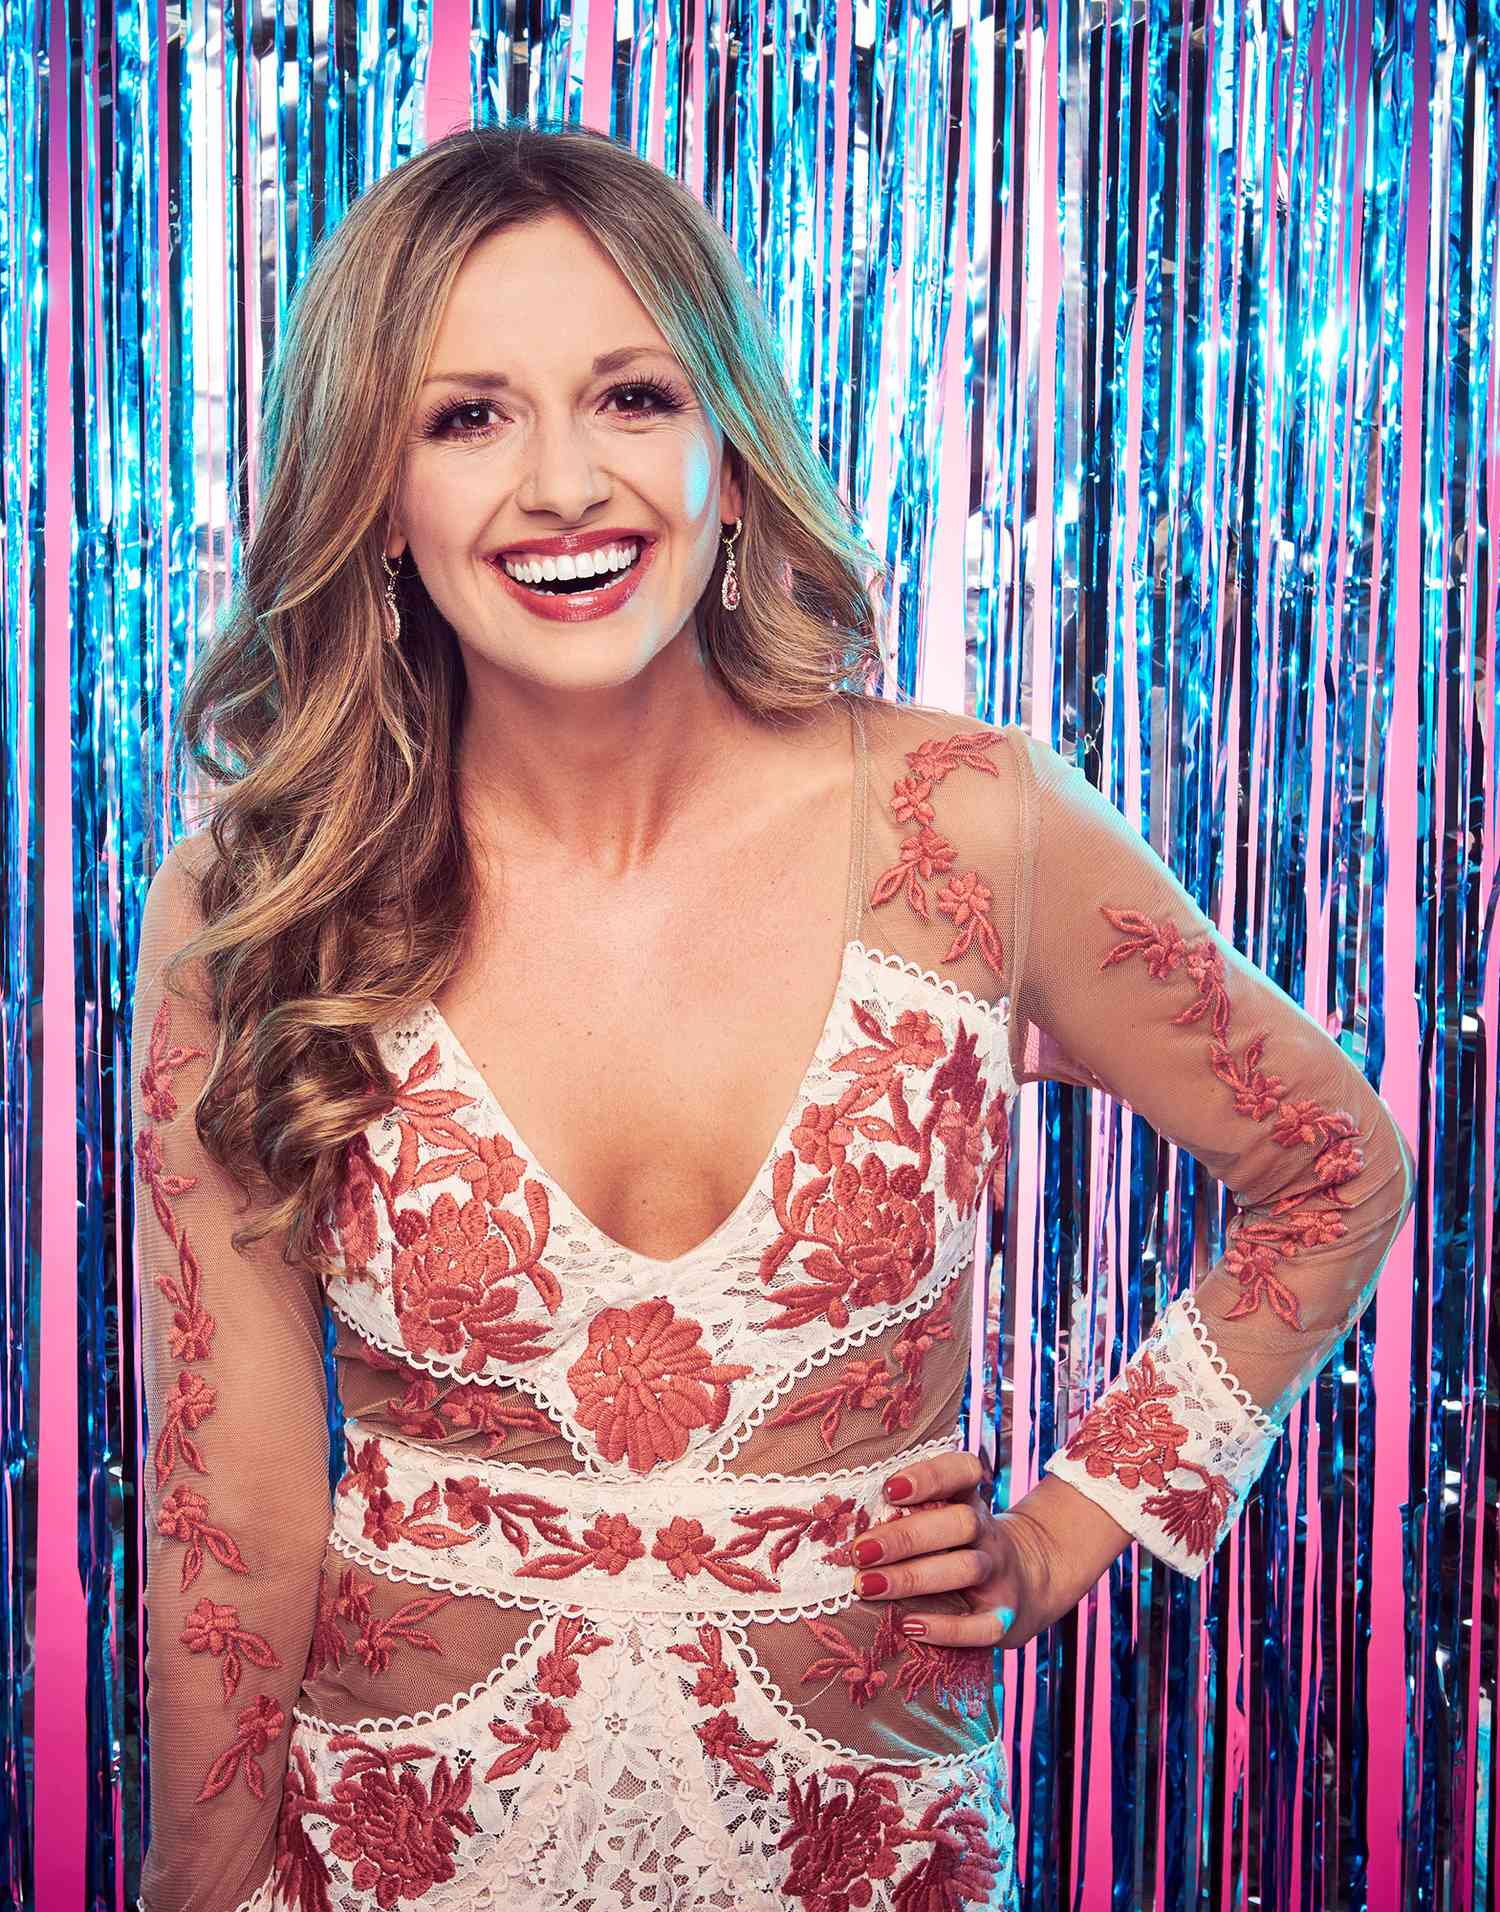 CARLY PEARCE: THE NEW VOICE OF COUNTRY